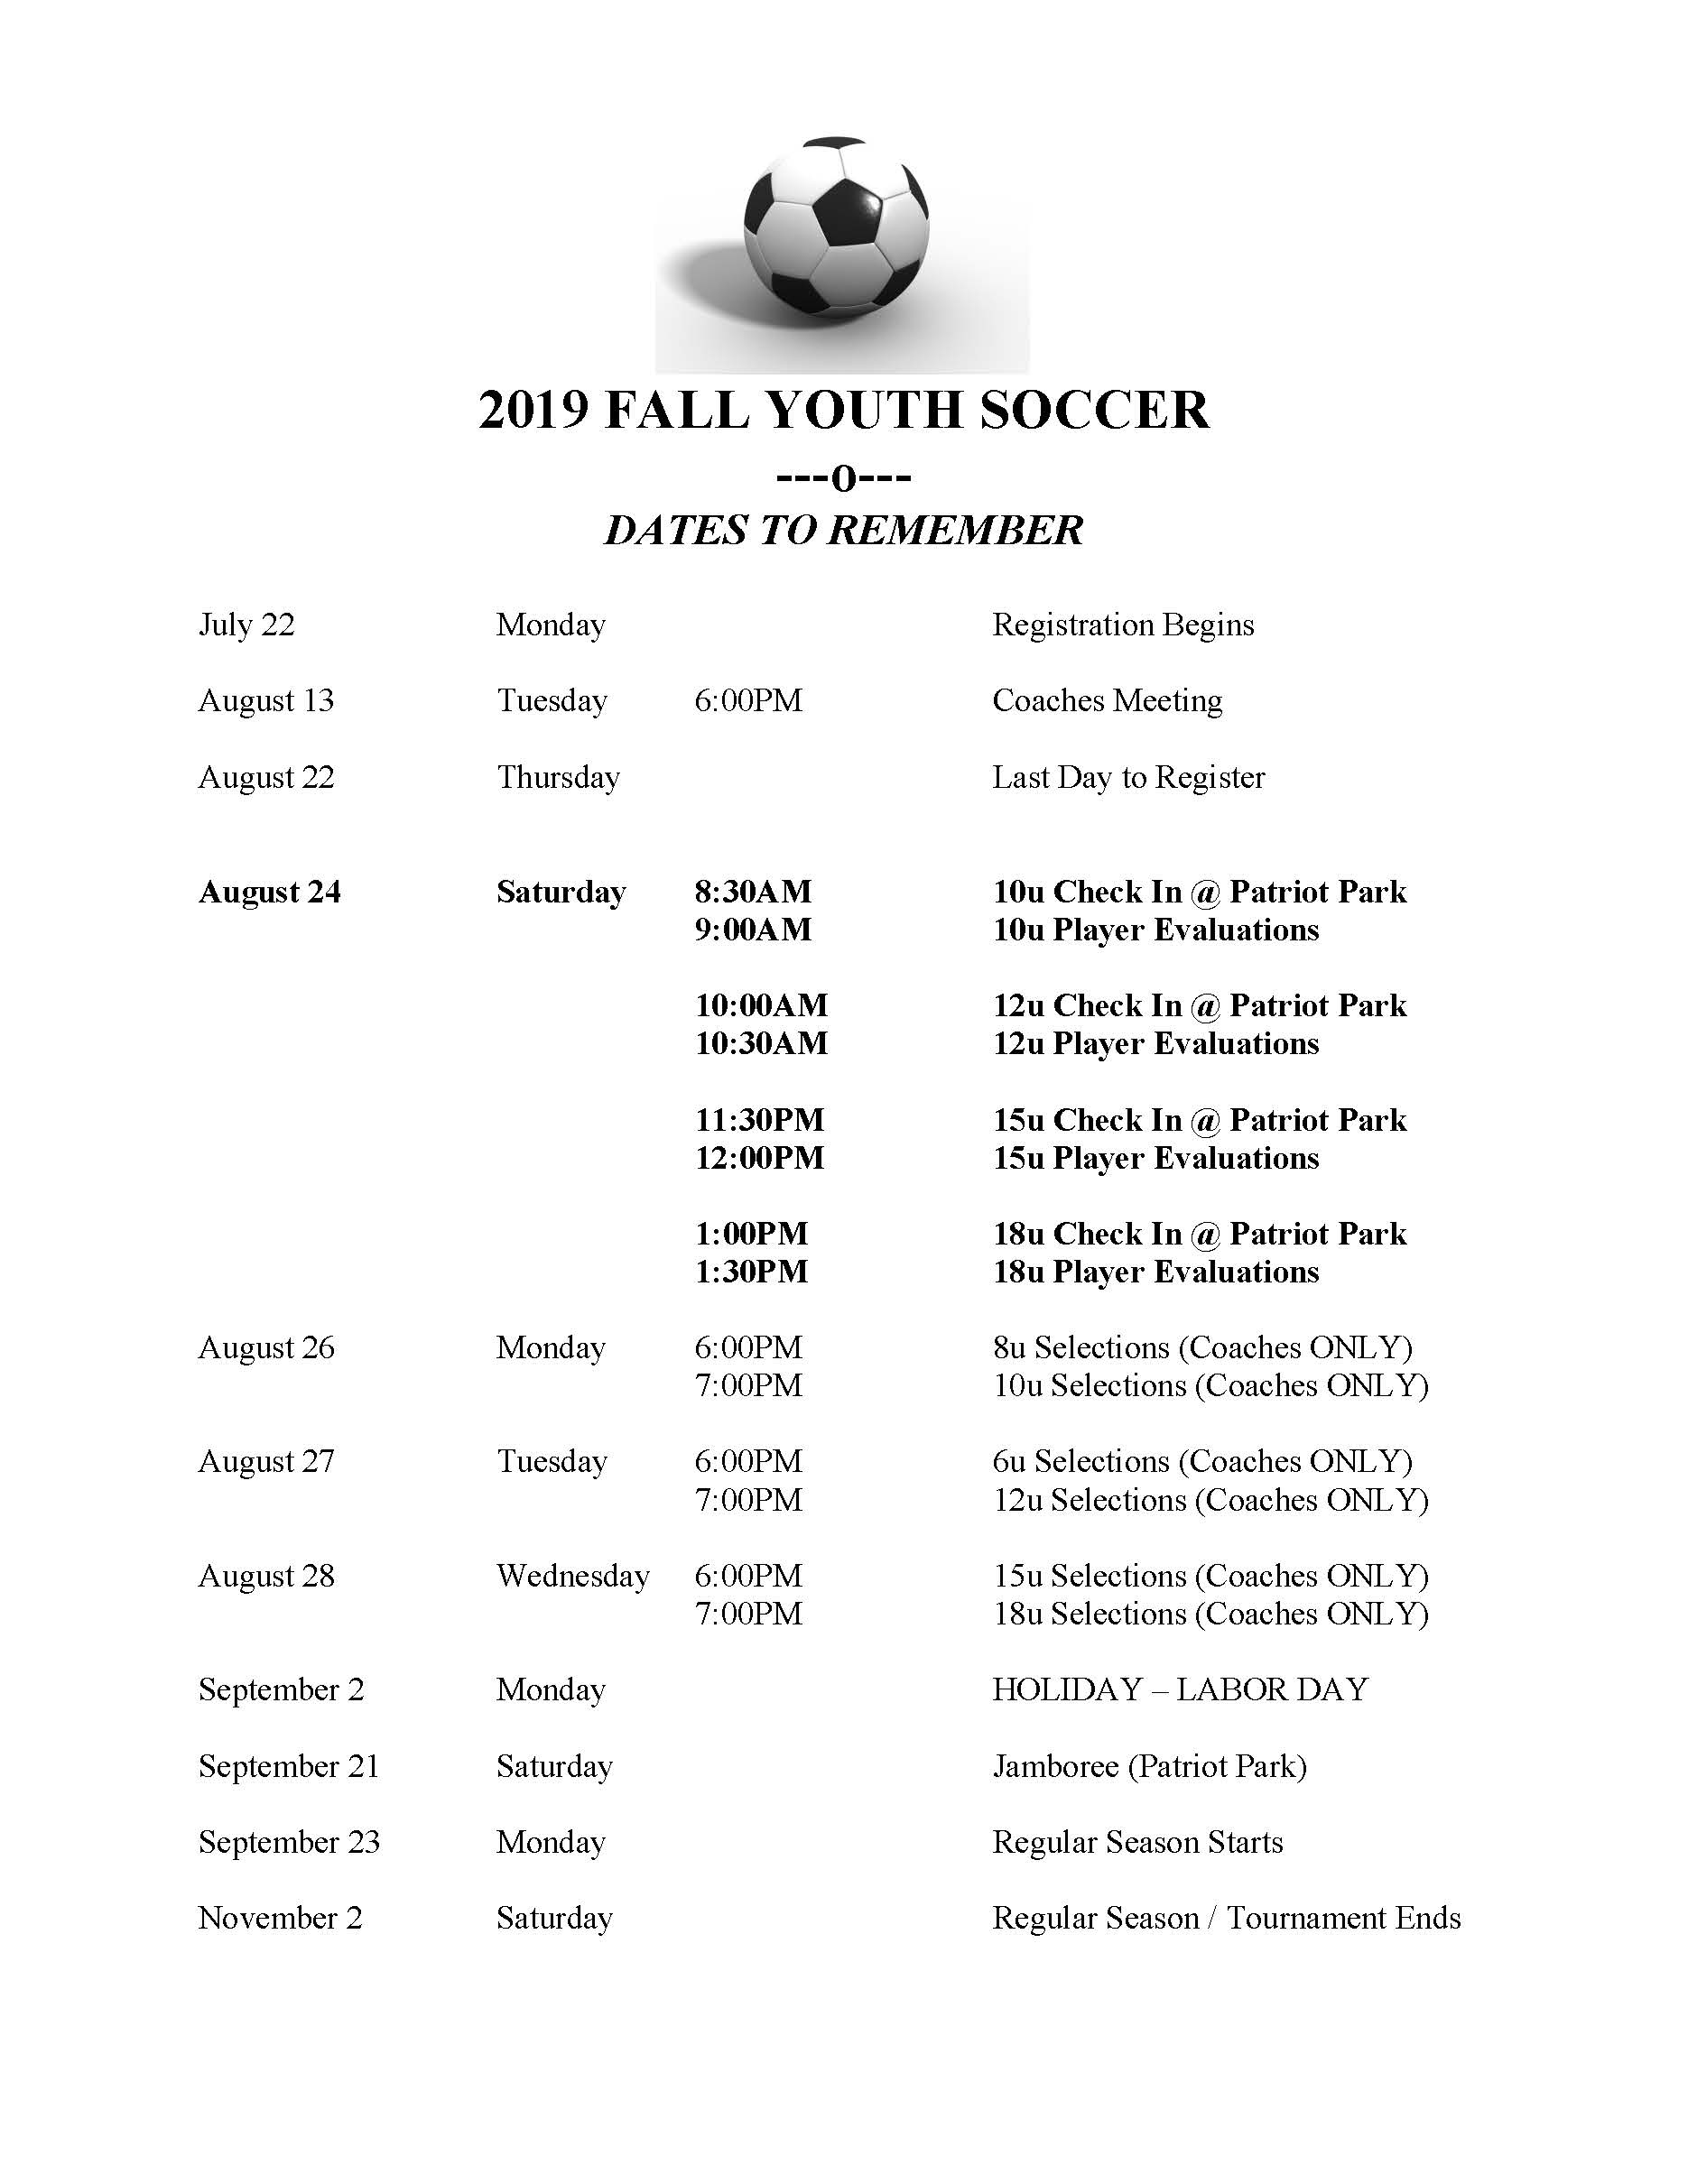 2019 FALL YOUTH SOCCER DATES (002)